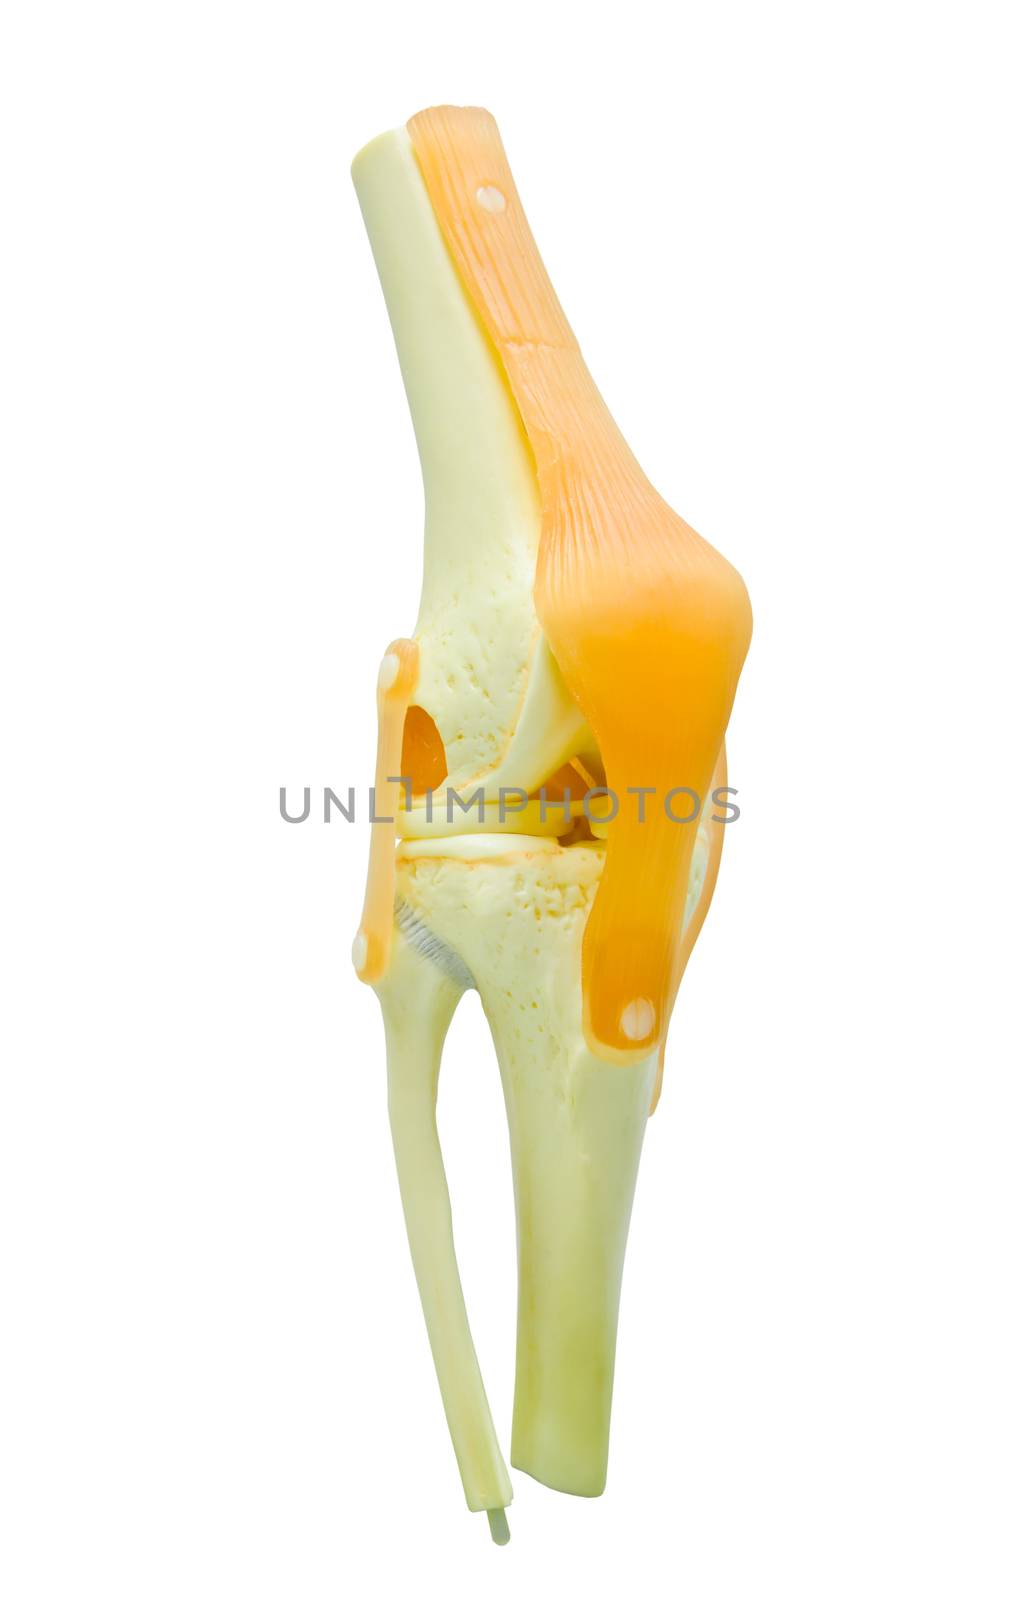 plastic study model of a knee replacement. by Gamjai